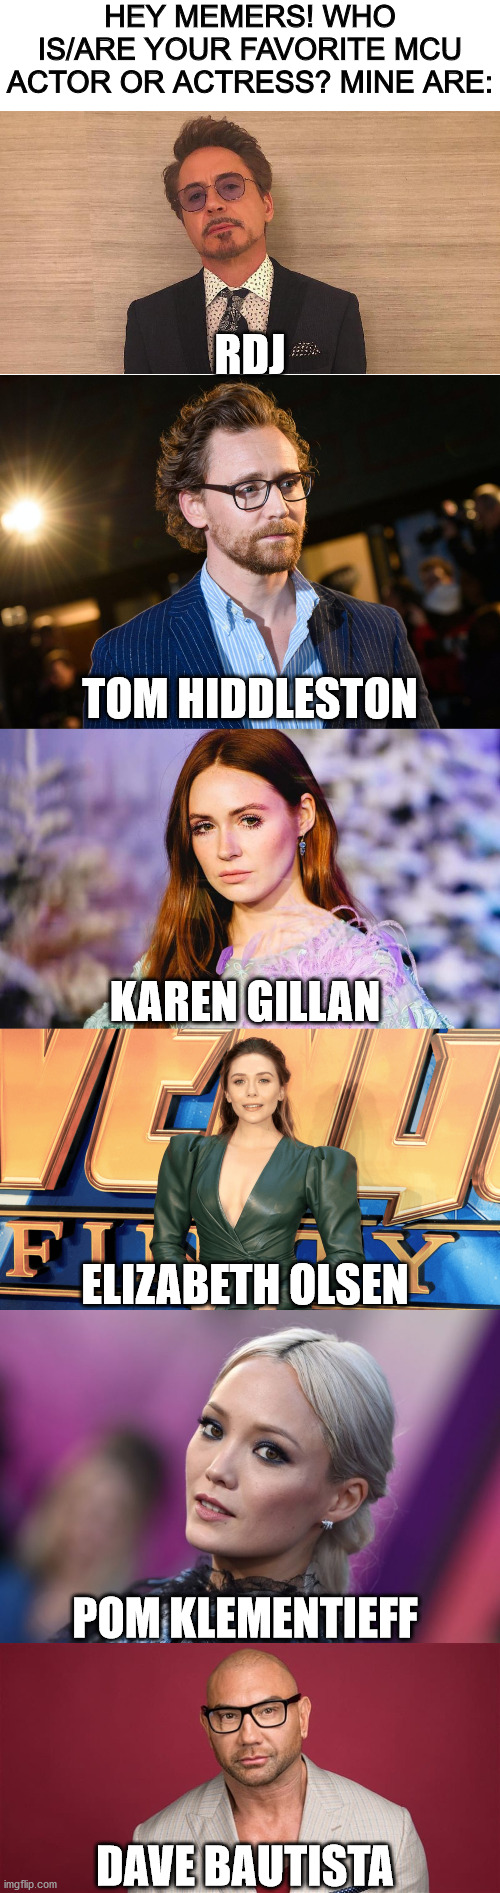 Sorry, I know it's a lot of people, but they are my absolute favorite mcu faves for different reasons. Feel free to share yours! | HEY MEMERS! WHO IS/ARE YOUR FAVORITE MCU ACTOR OR ACTRESS? MINE ARE:; RDJ; TOM HIDDLESTON; KAREN GILLAN; ELIZABETH OLSEN; POM KLEMENTIEFF; DAVE BAUTISTA | image tagged in blank white template,mcu | made w/ Imgflip meme maker